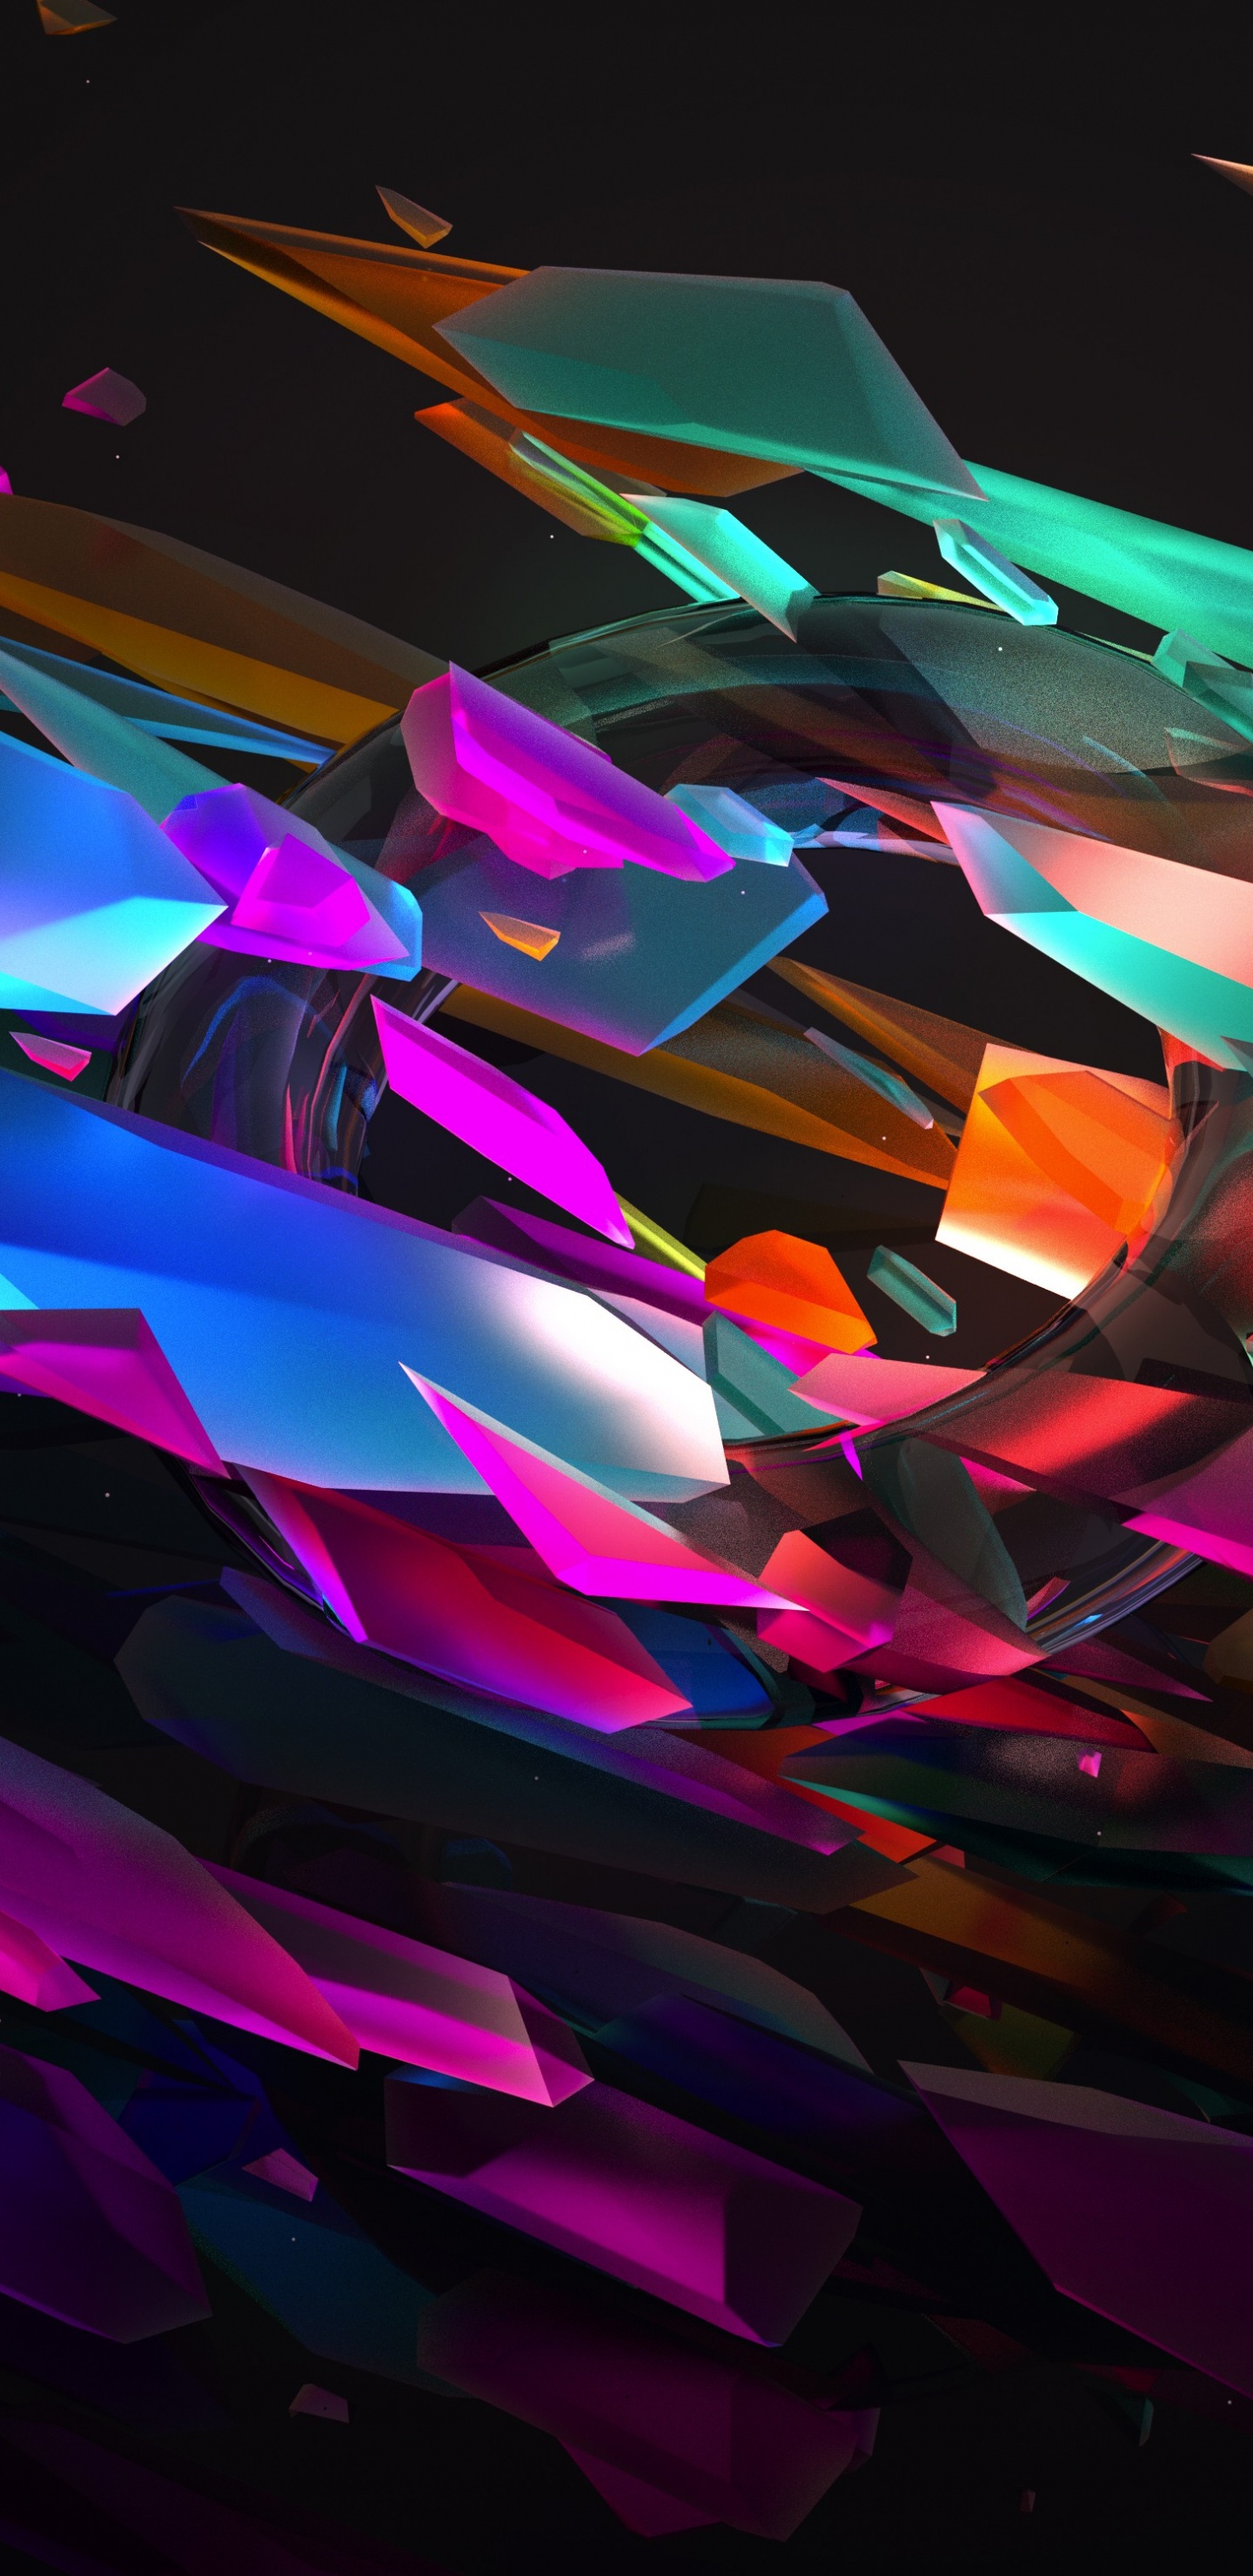 Purple Orange and Blue Abstract Art. Wallpaper in 1440x2960 Resolution